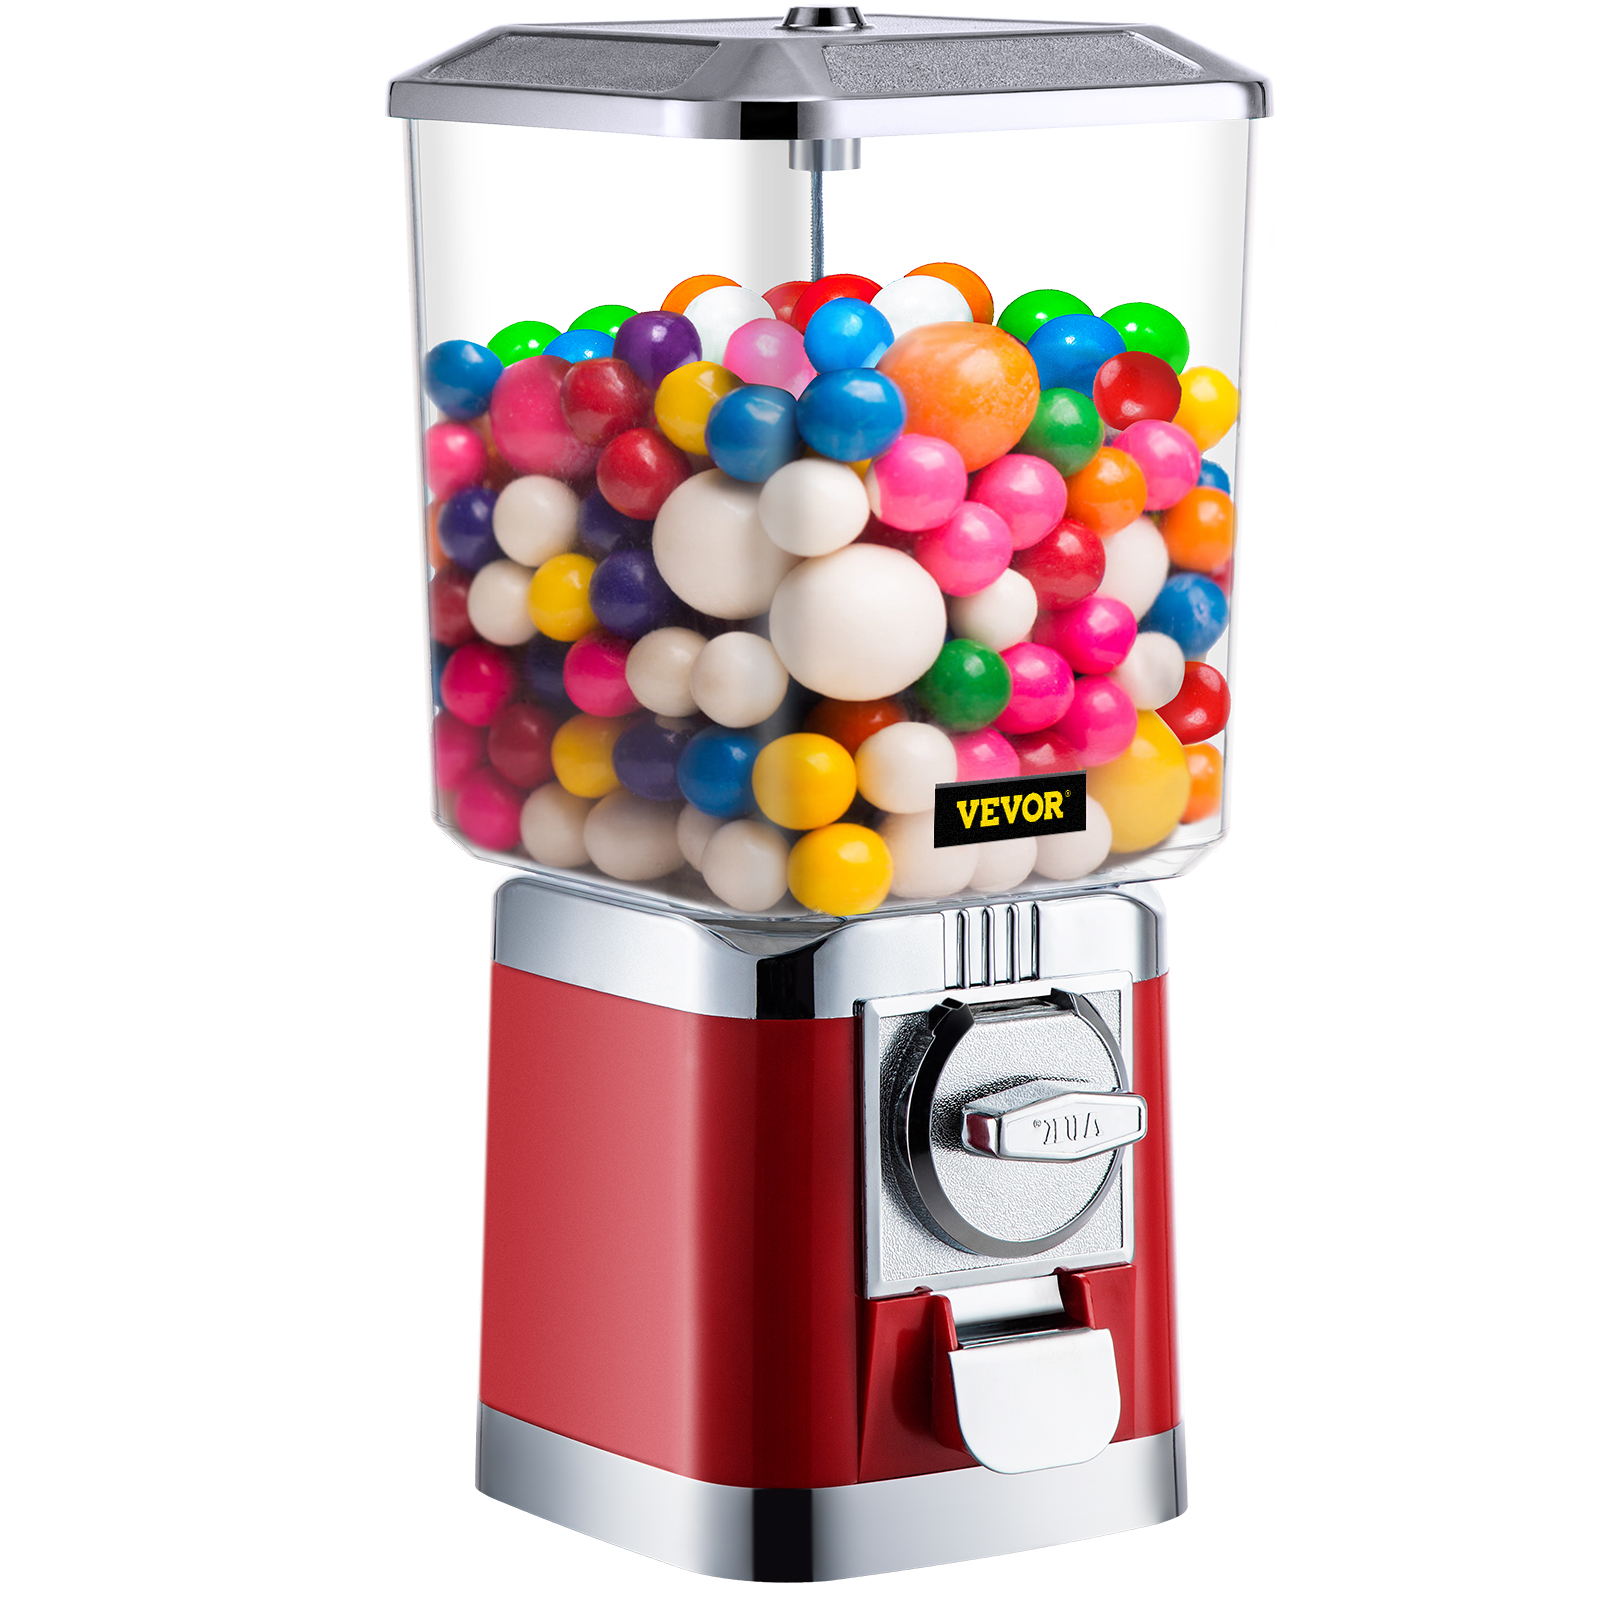 BUBBLE GUM GUMBALL MACHINE SWEET CANDY VENDING DISPENSER COIN BANK VINTAGE RED 